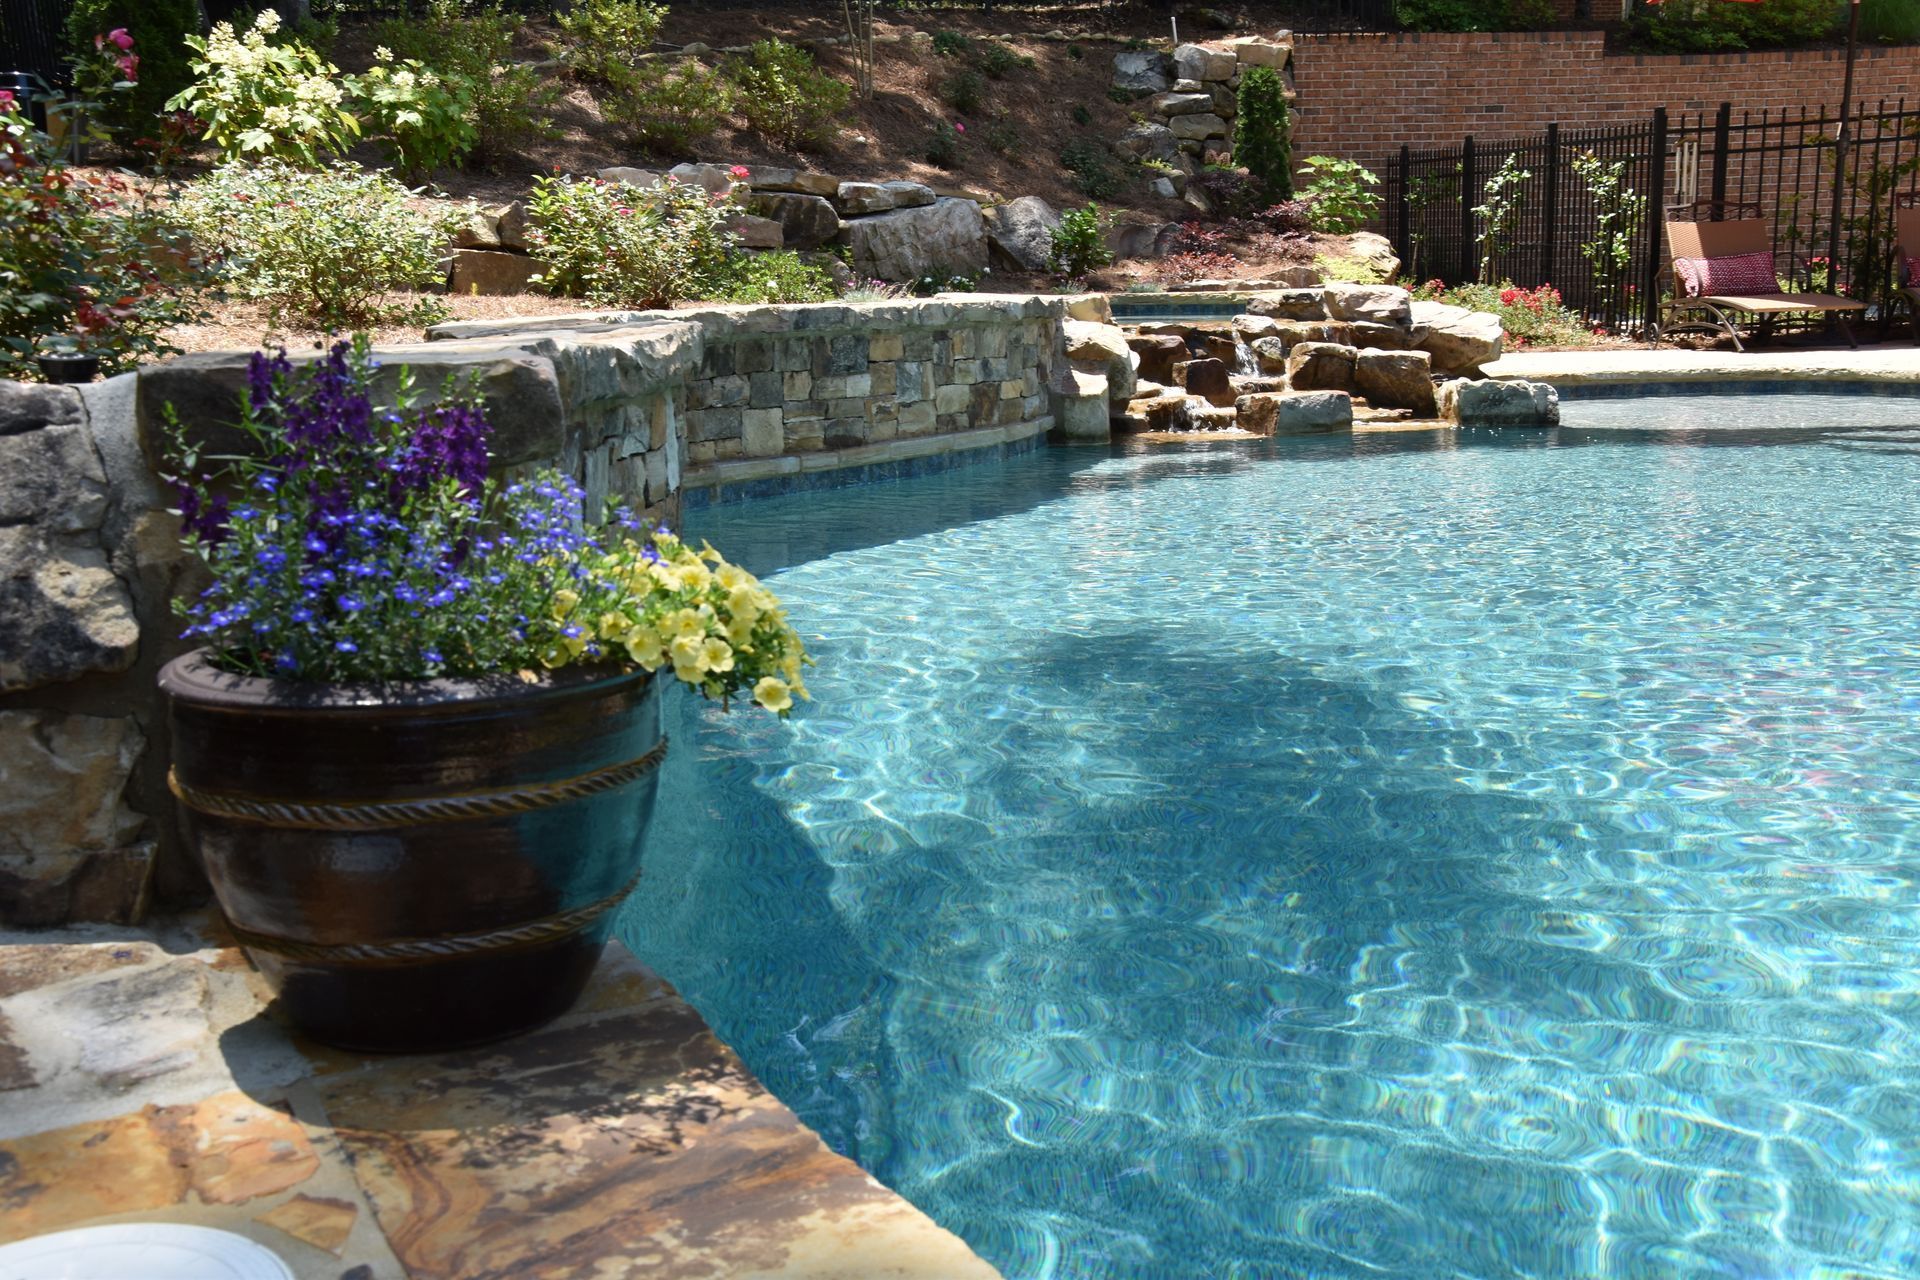 There is a large swimming pool in the backyard of a house.